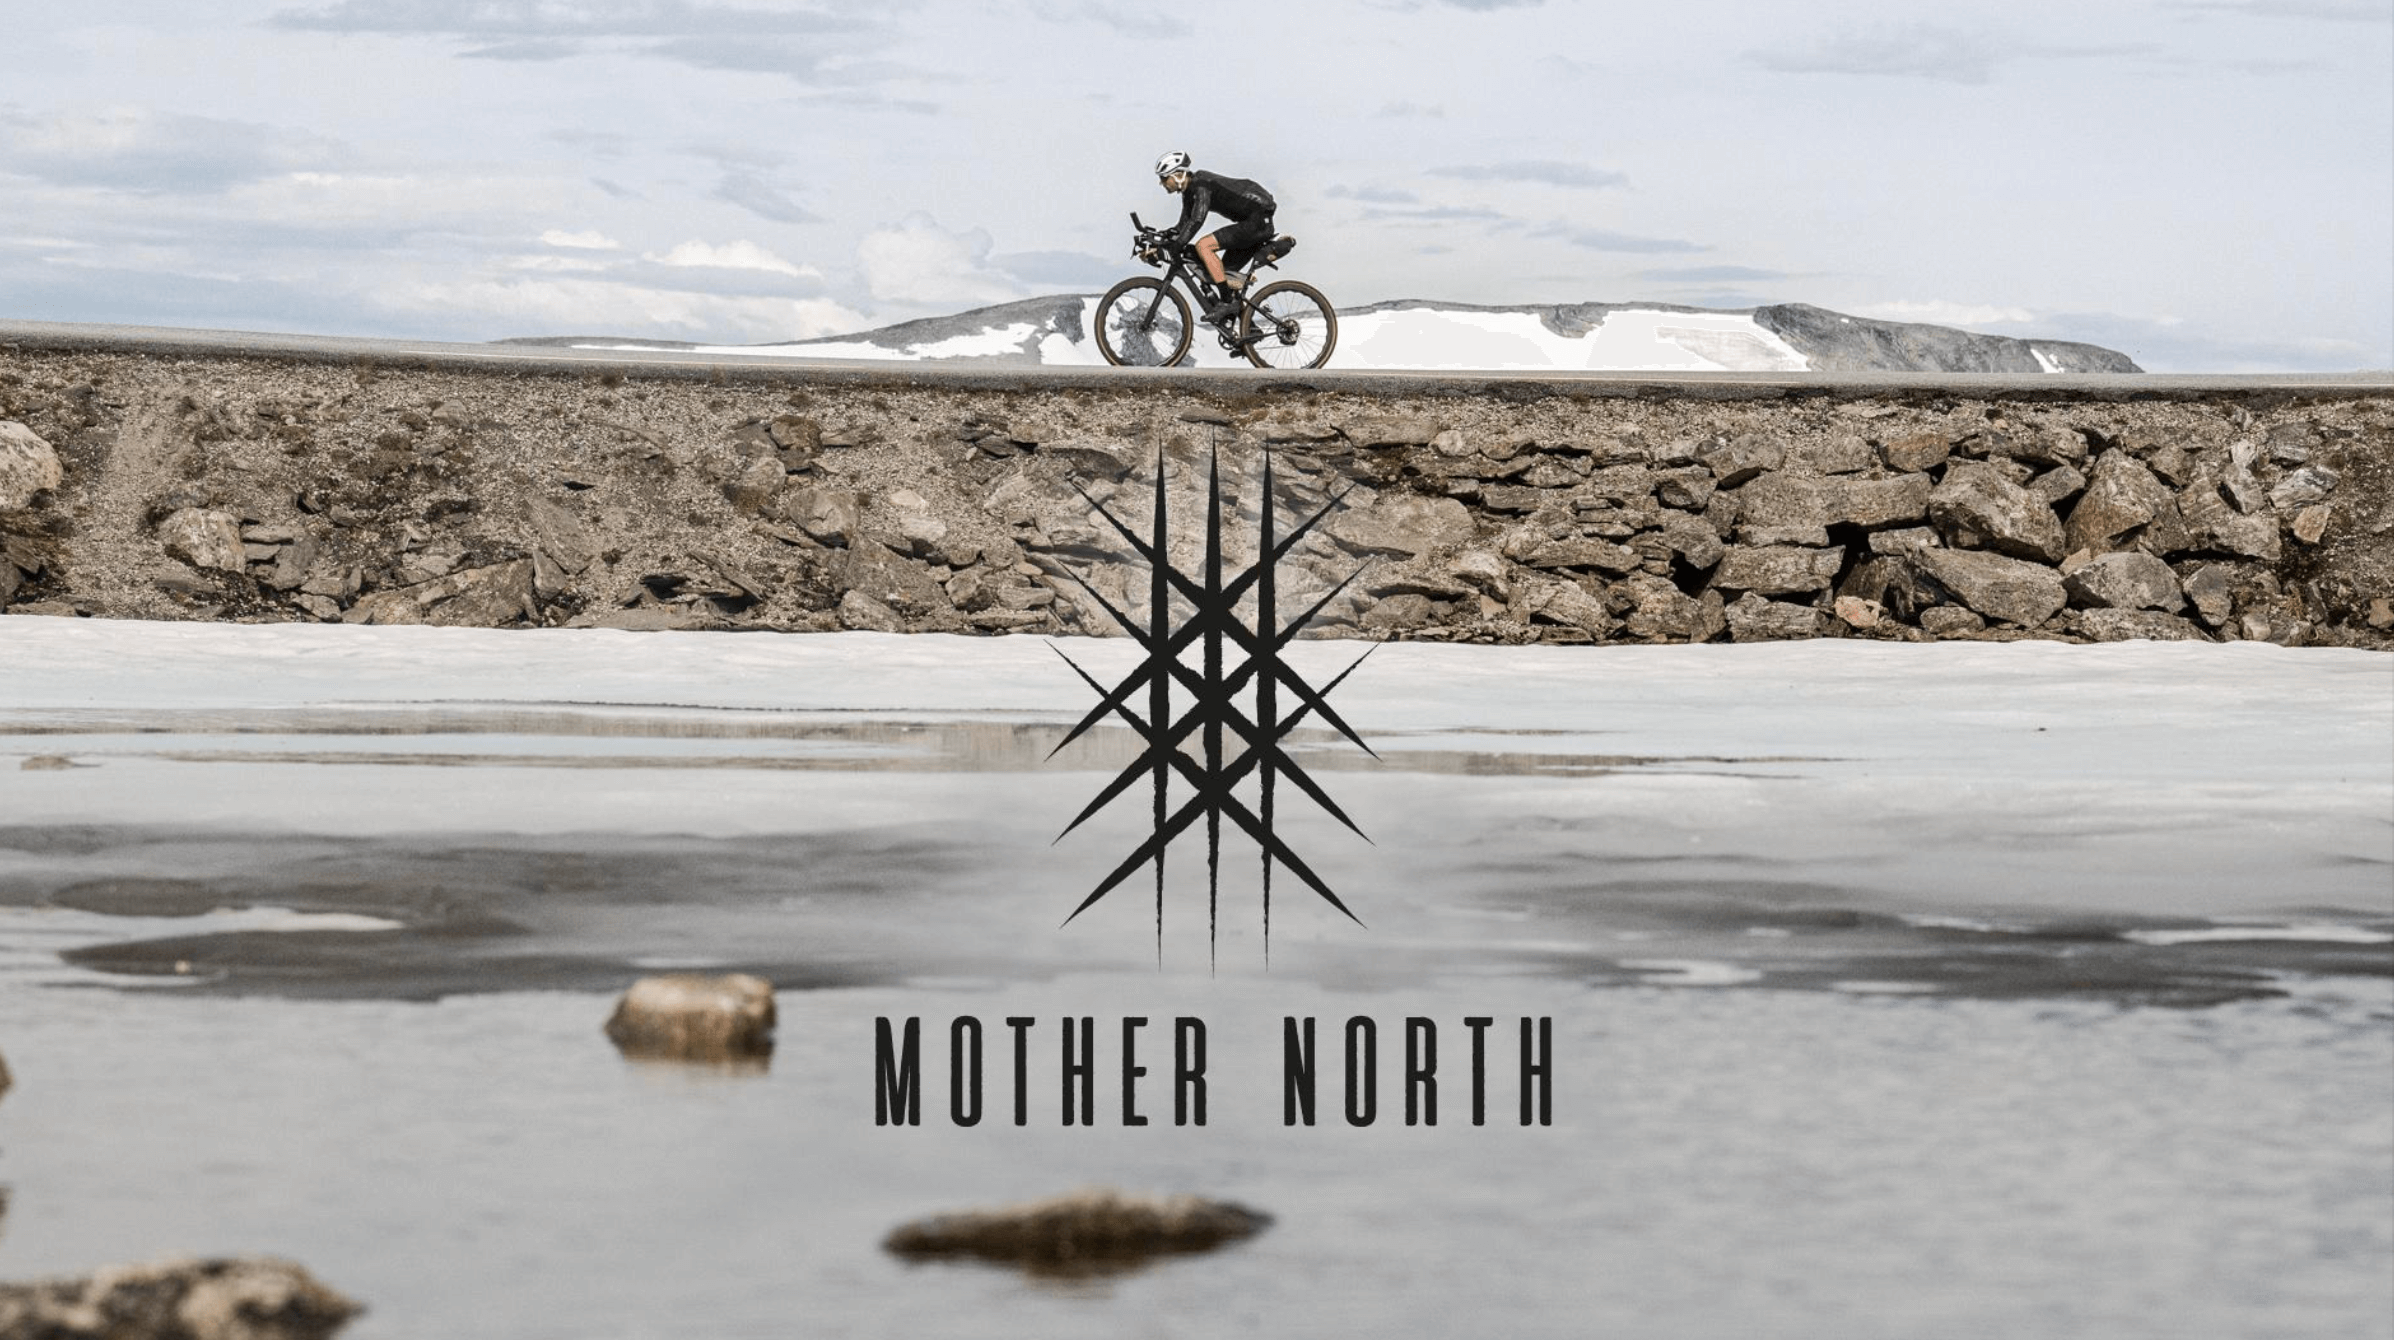 Mother North - ultra race in Norway - 11th of August 202